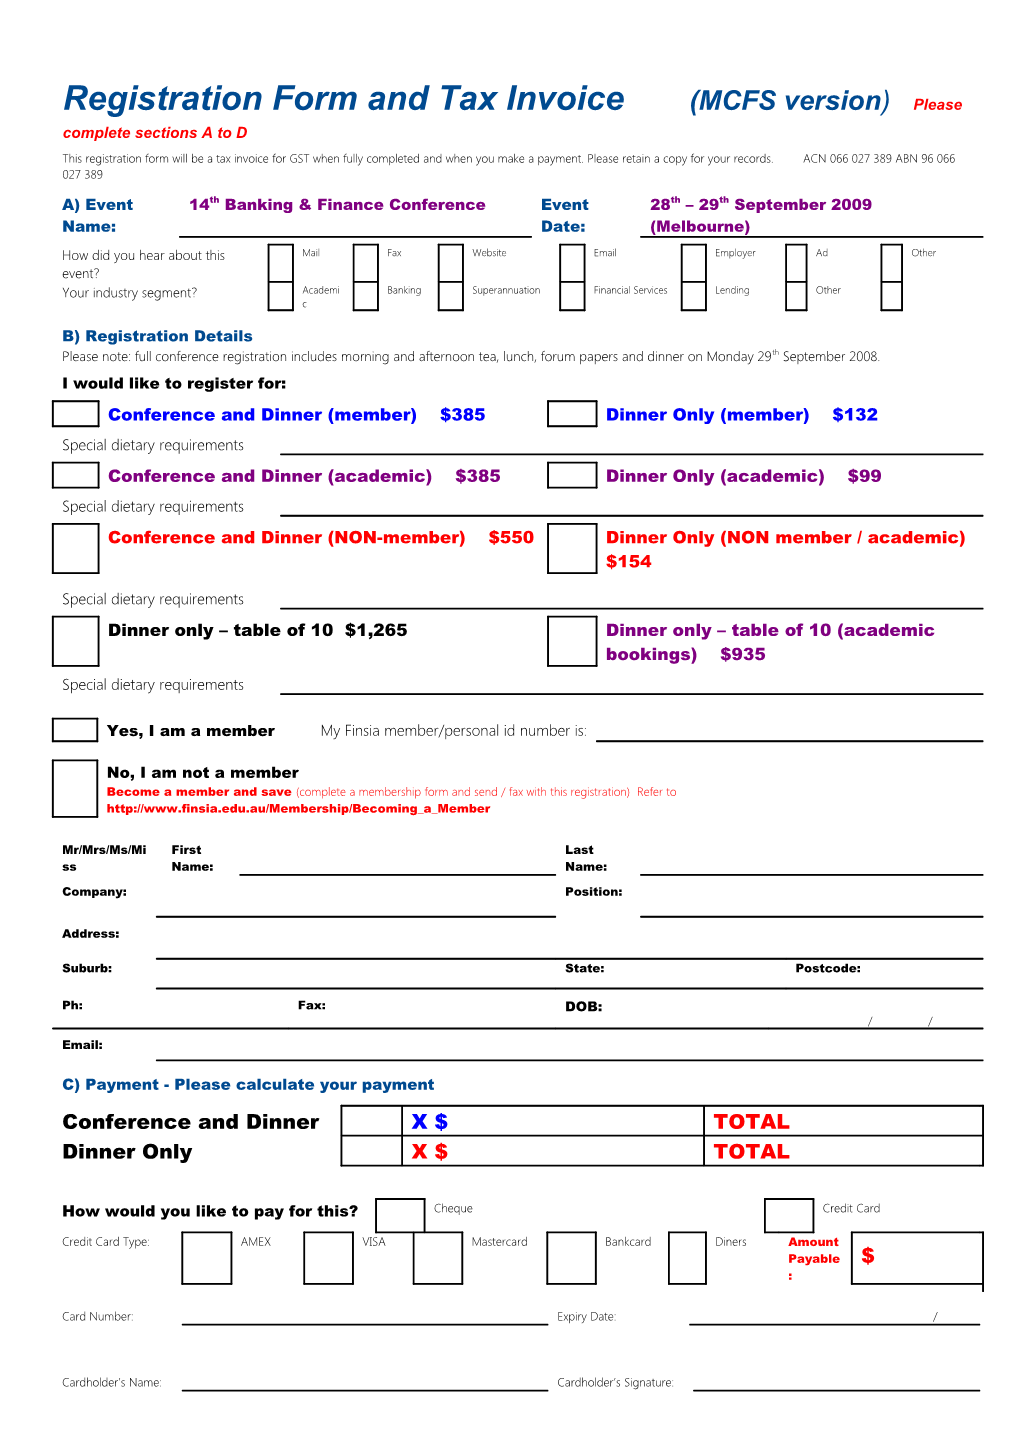 Registration Form and Tax Invoice